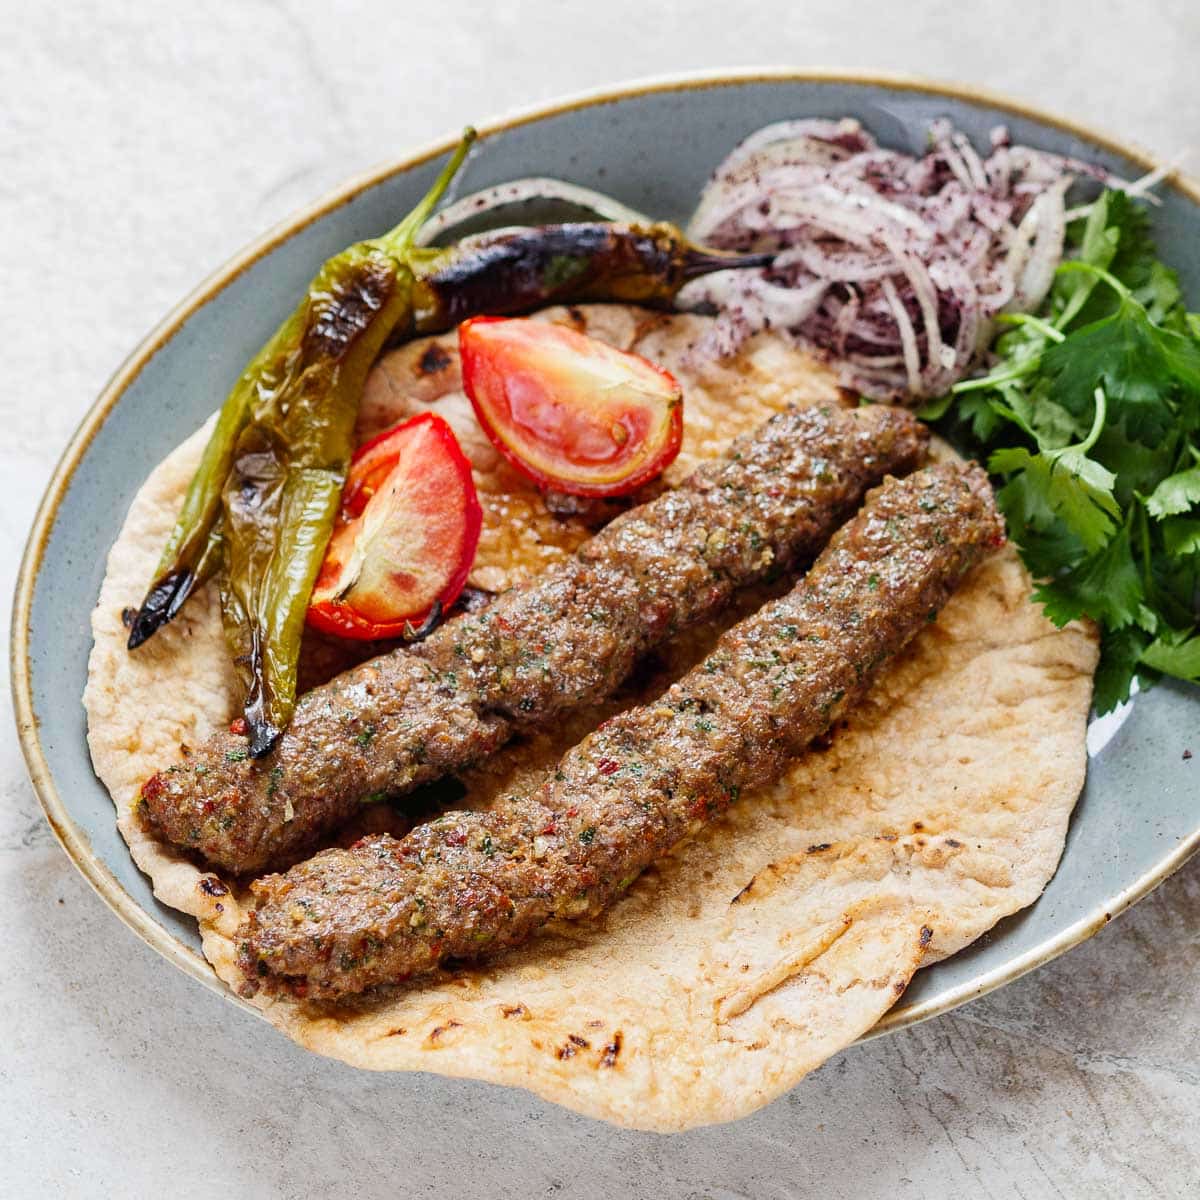 Two Adana kebabs, two pieces of grilled tomato and two grilled long green peppers on a lavash bread. There's also onion salad and parsley on the oval plate set on a light stone background. Seen from eye level